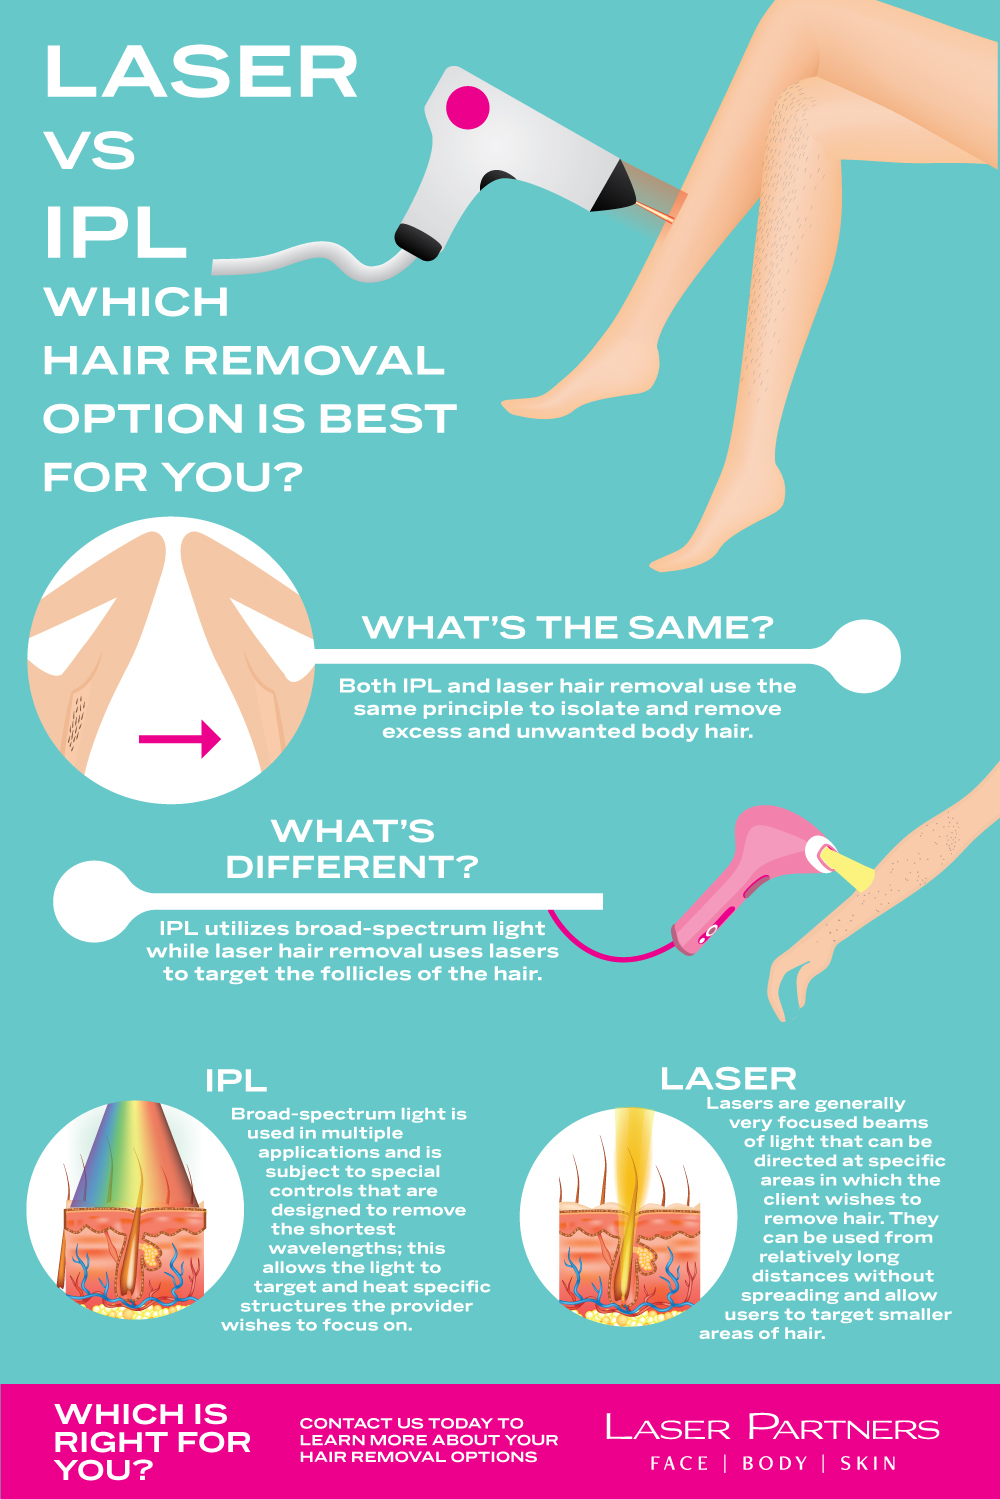 Laser vs IPL hair removal: which is best?